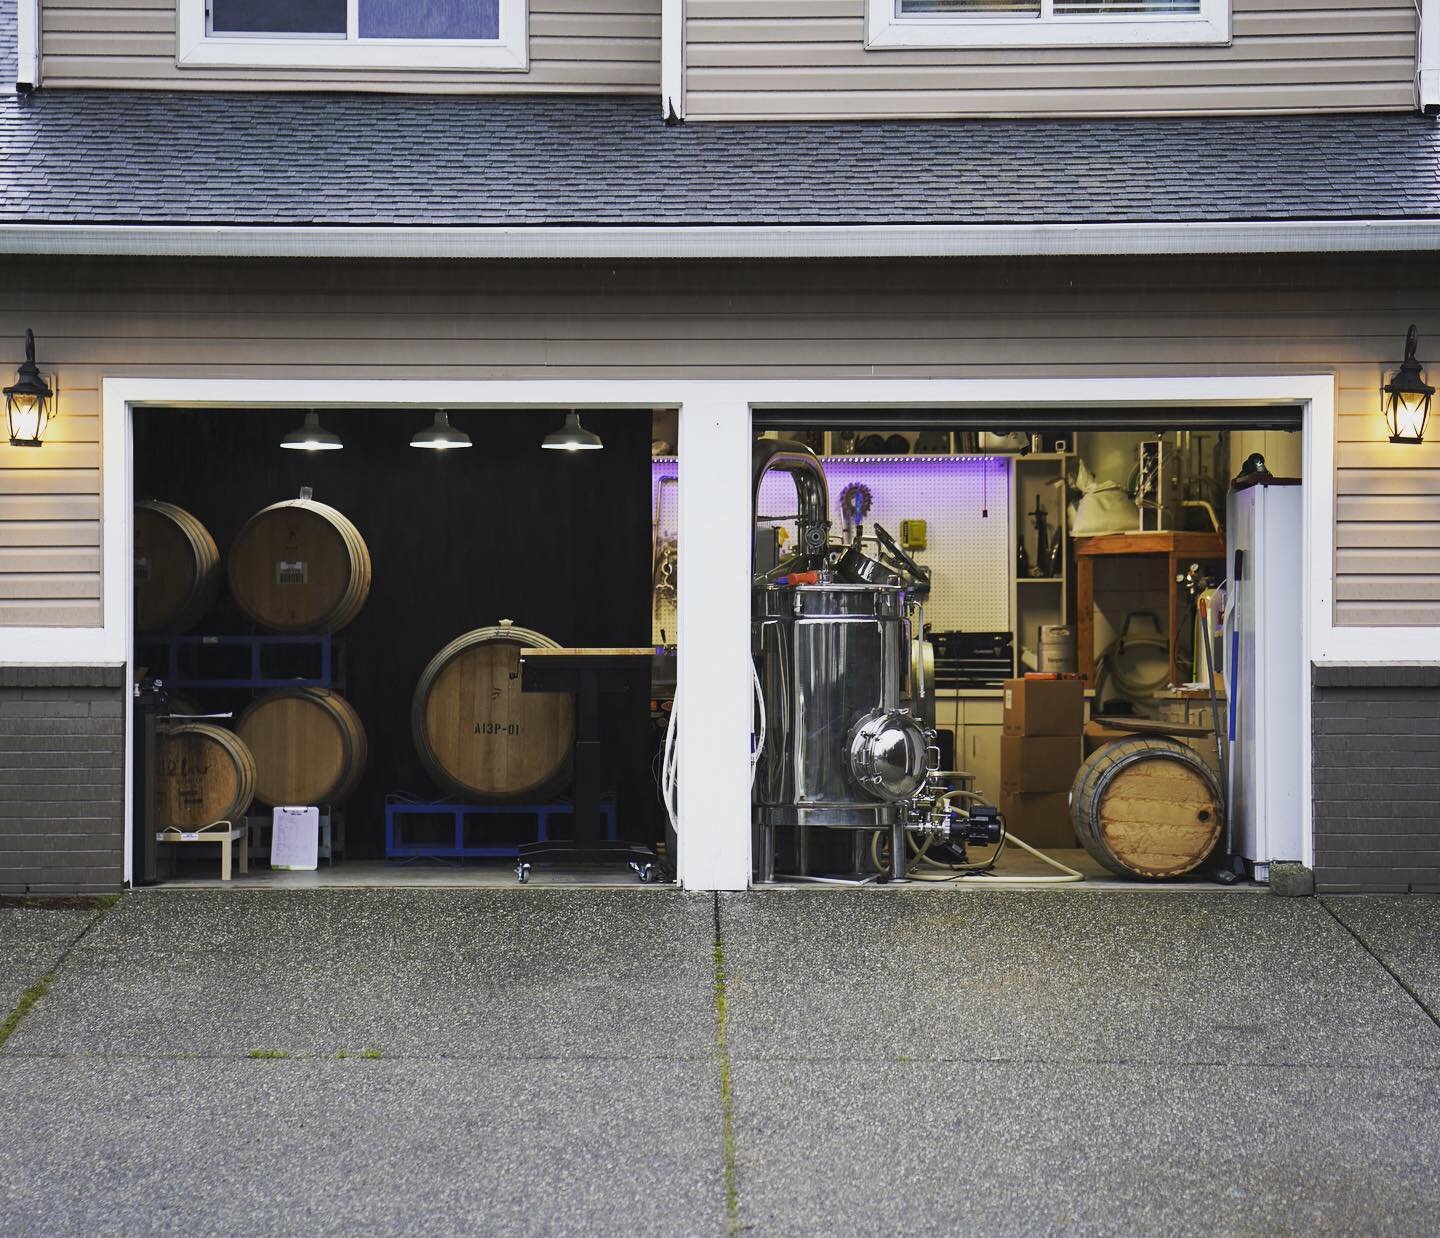 Some wonder where Wild Oak Project is made. Here it is, 500 sq ft two car garage. Something that took me years to build and develop and something I am very proud of. #independentbrewery #nanobrewery #openfermentation #barrelaged #mixedculture #sourbe